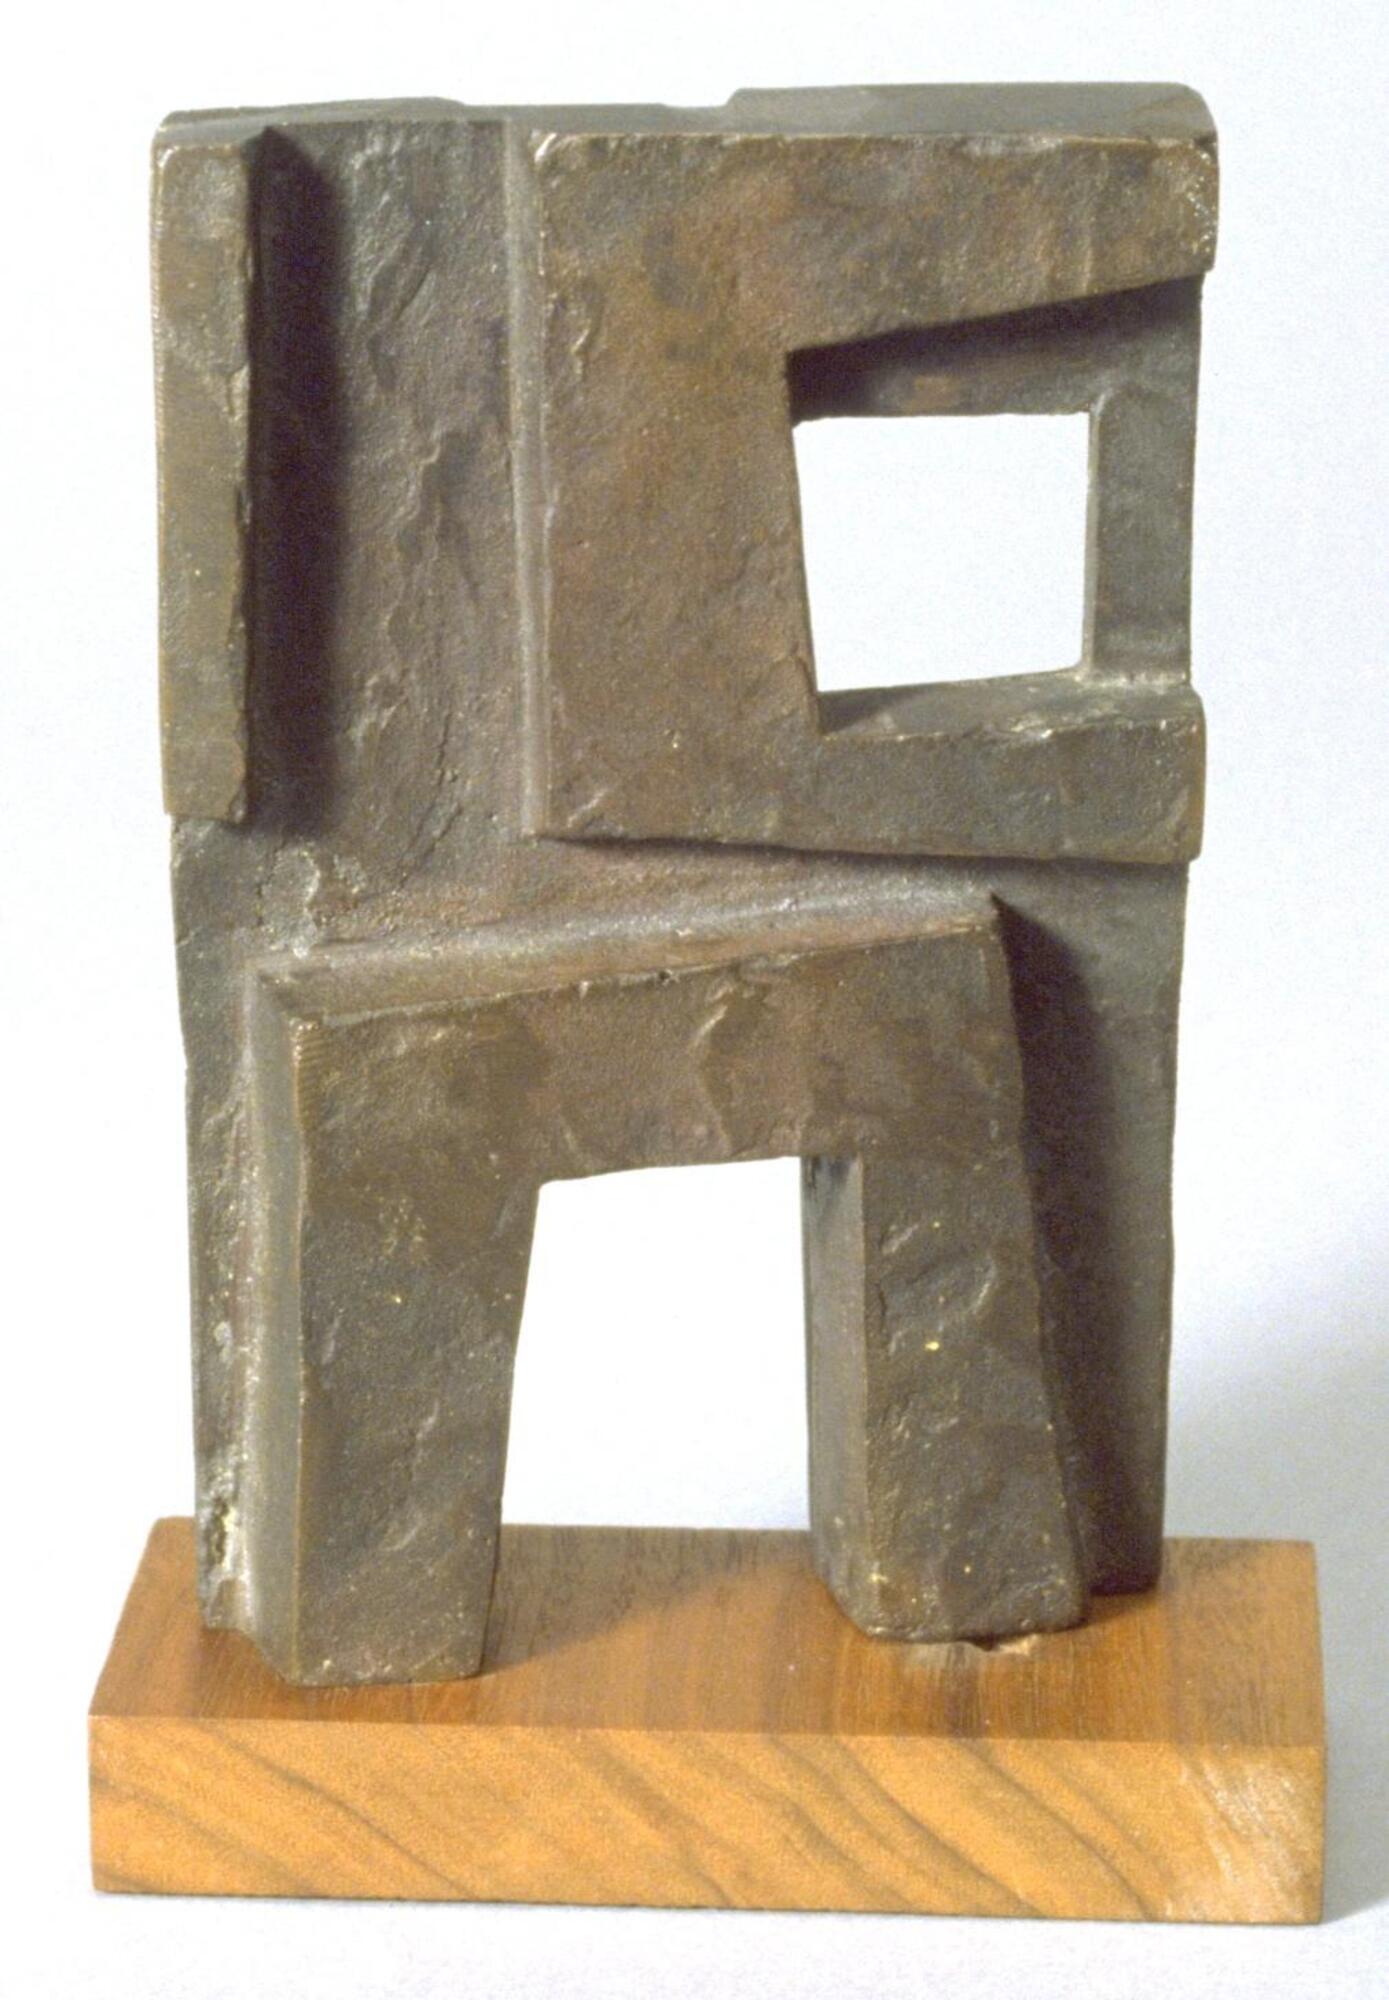 Thin, double-side, H-shaped bronze sculpture. Each side is made up of a collection of rough rectangle shapes overlapping and butting up against one another. Two rectangle-shaped openings penetrate the piece.